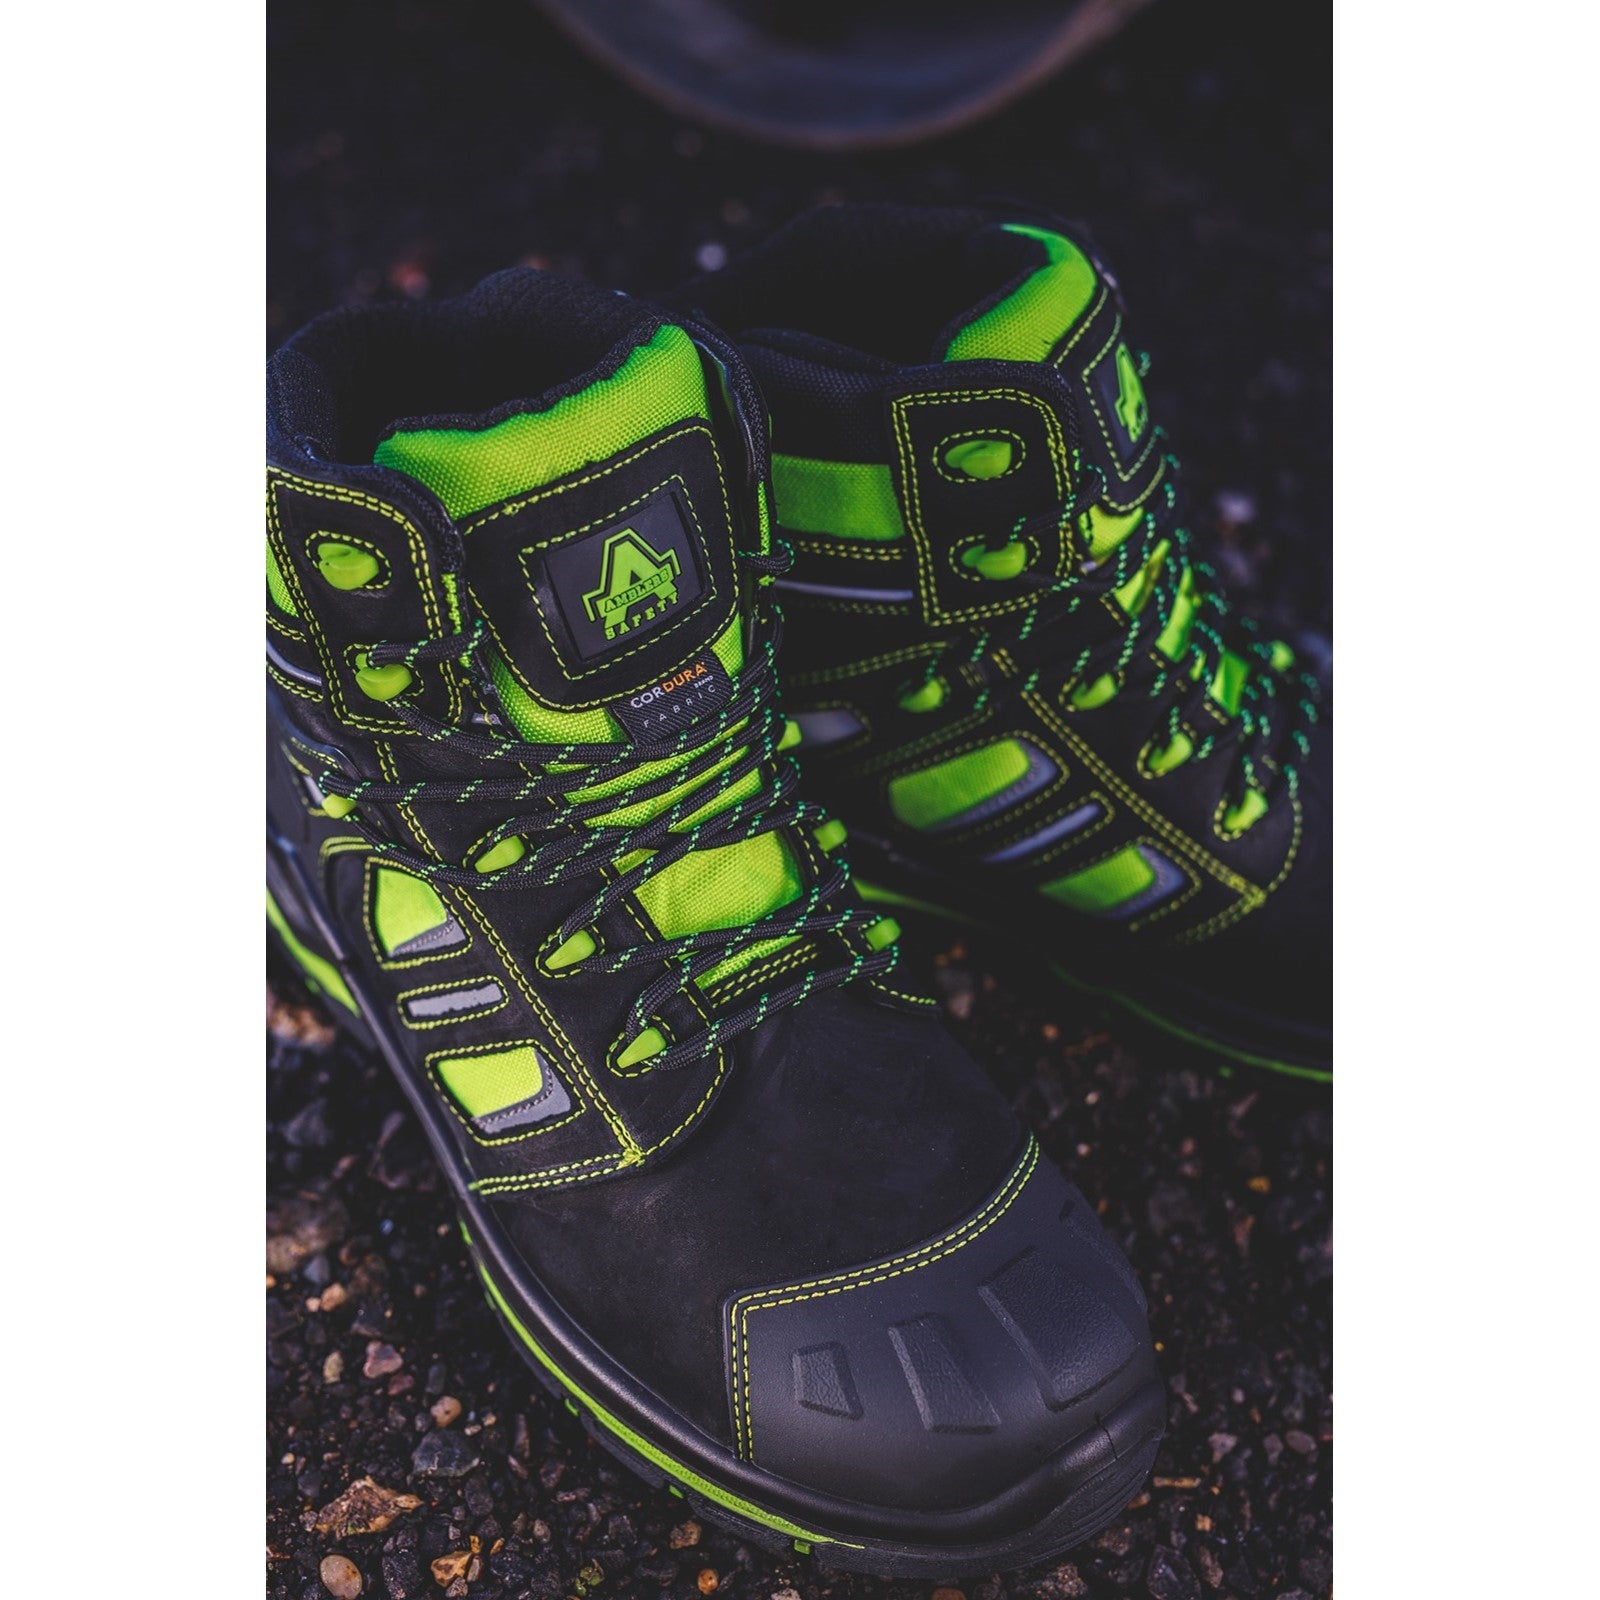 Amblers Radiant Safety Boot